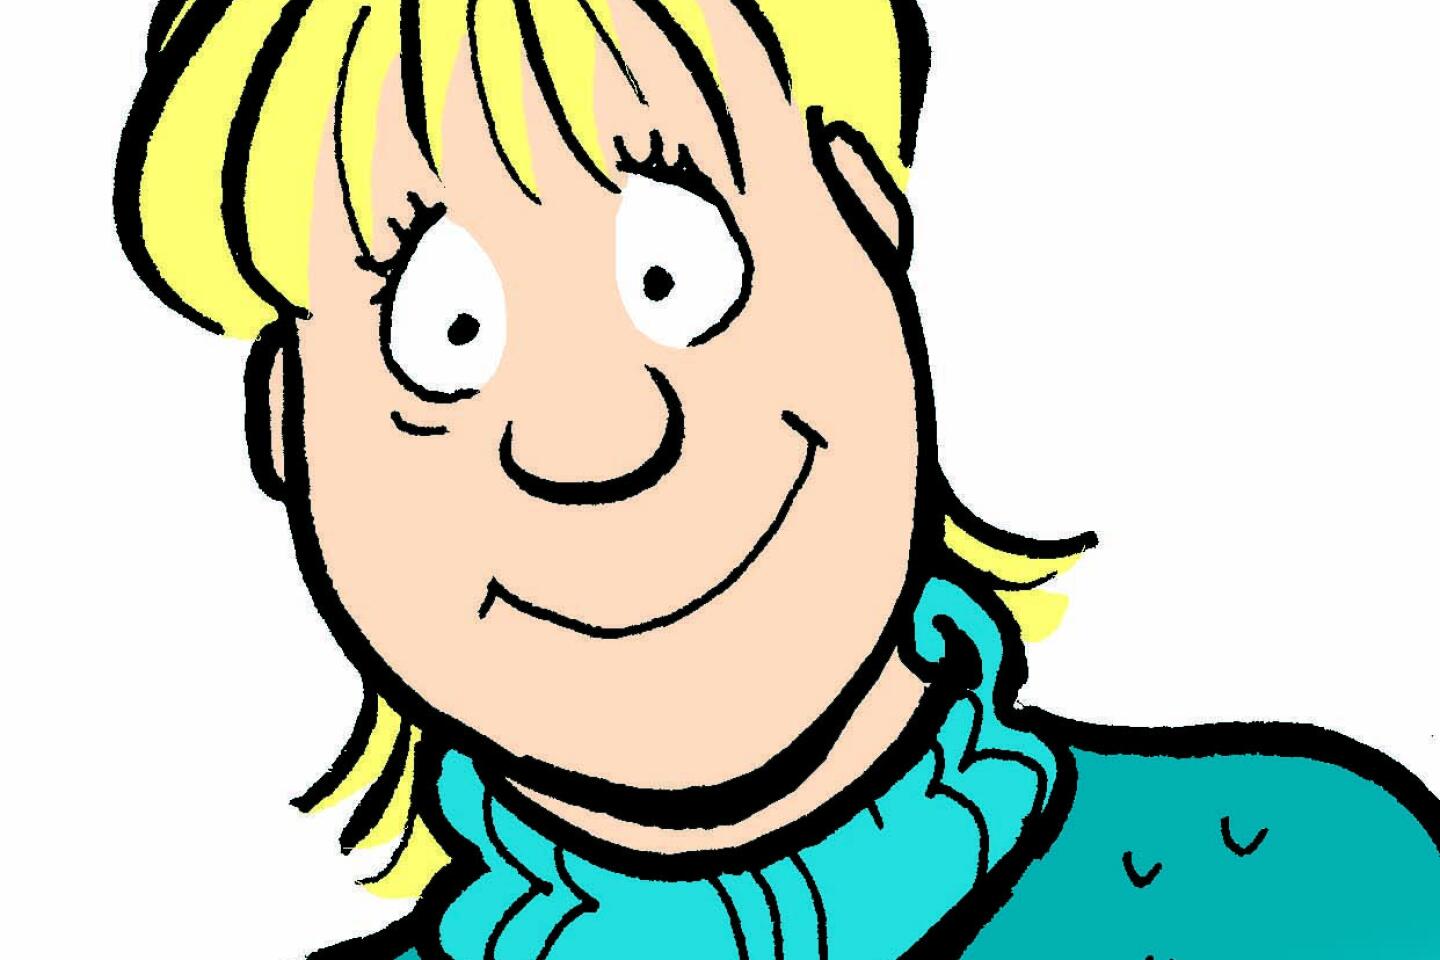 Illustration of a smiling blond woman